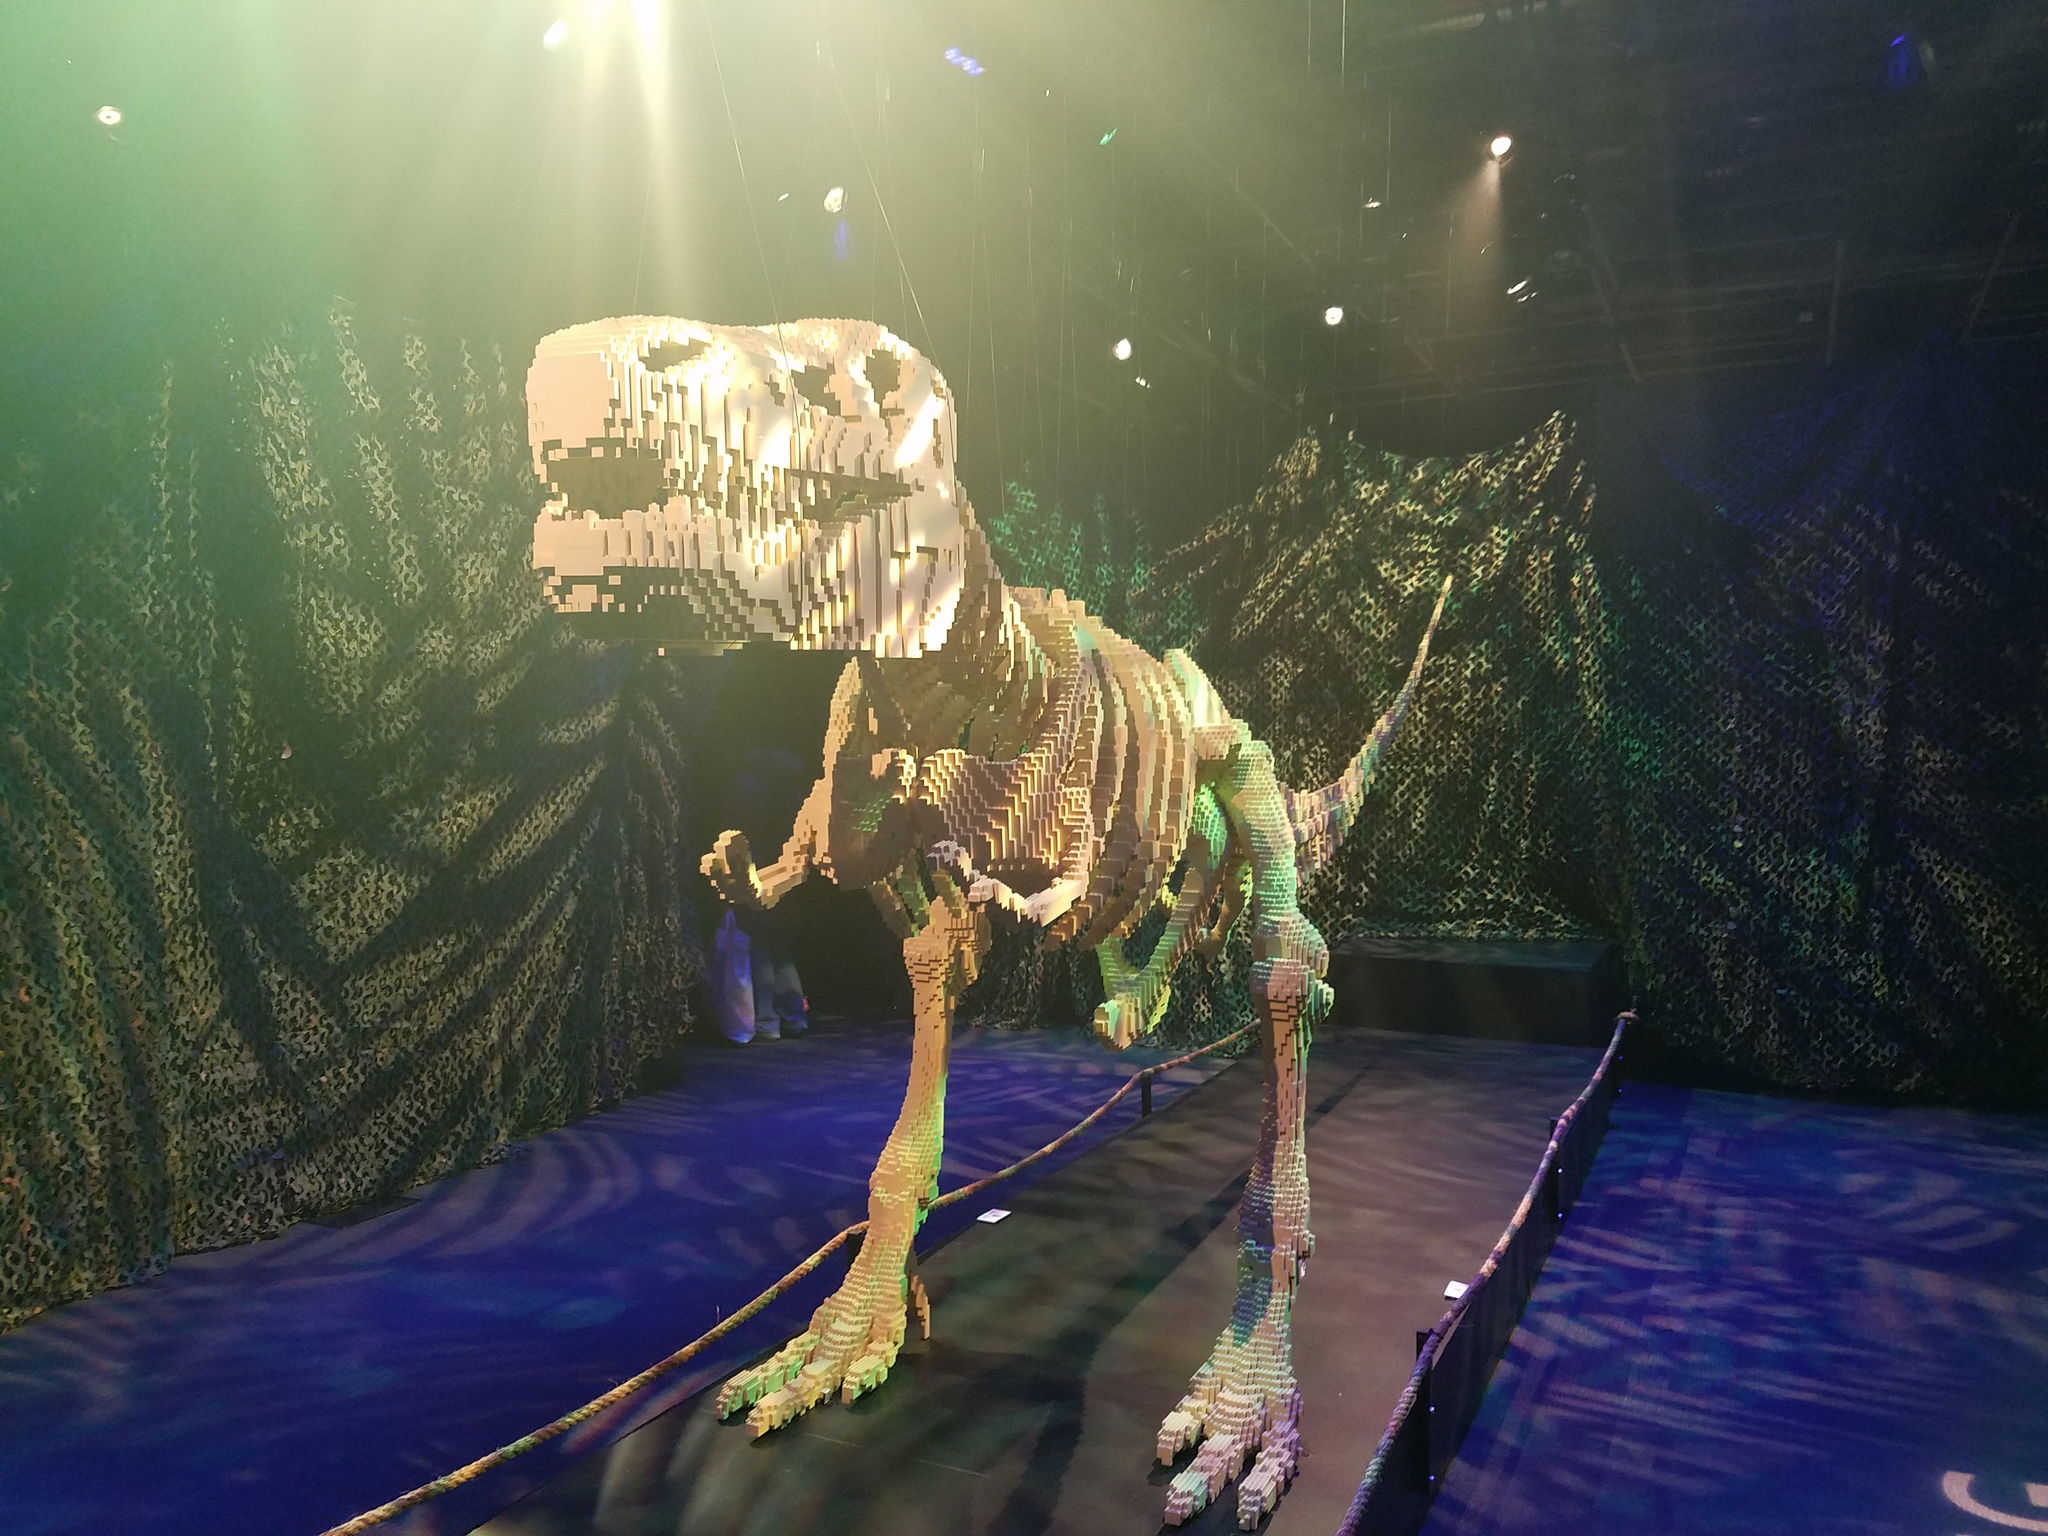 Sawaya spent a summer constructing this enormous dinosaur skeleton, which is built with a whopping 80,020 Legos.